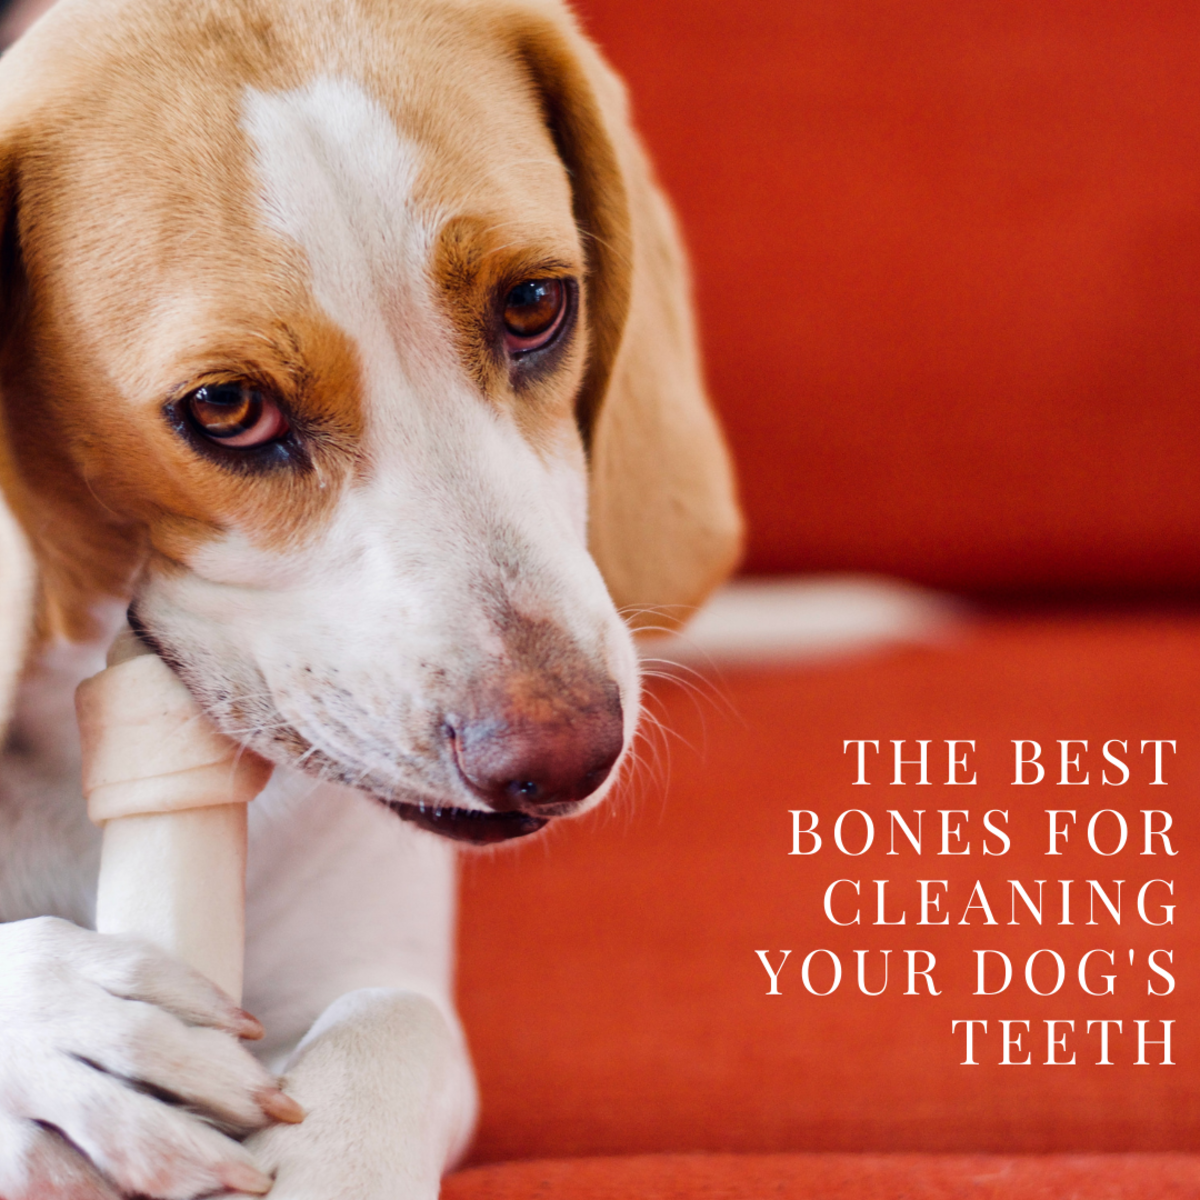 This guide will help you determine which bones might work best for maintaining your dog's dental hygiene.